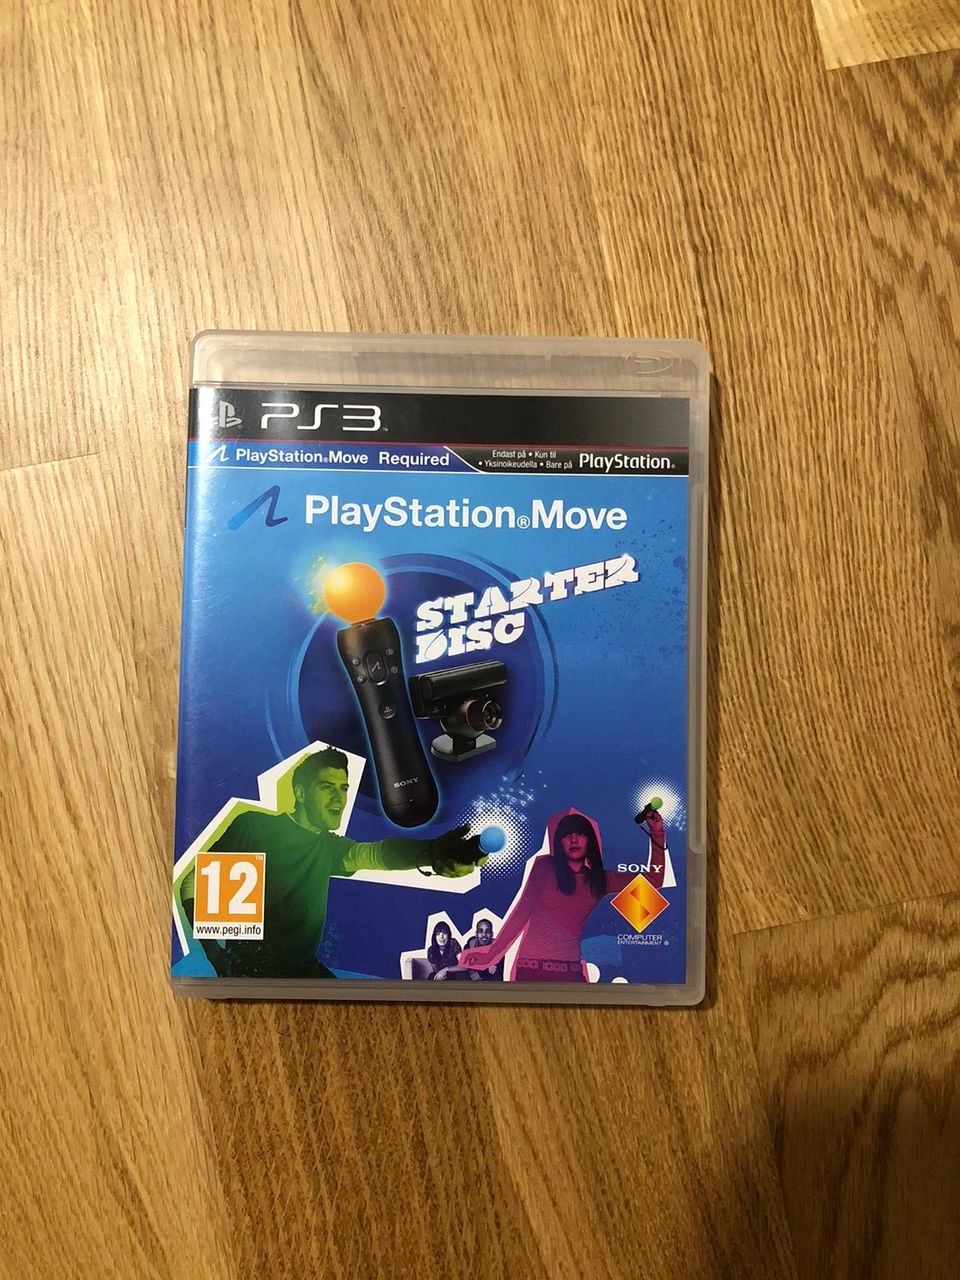 Playstation move: starter disc